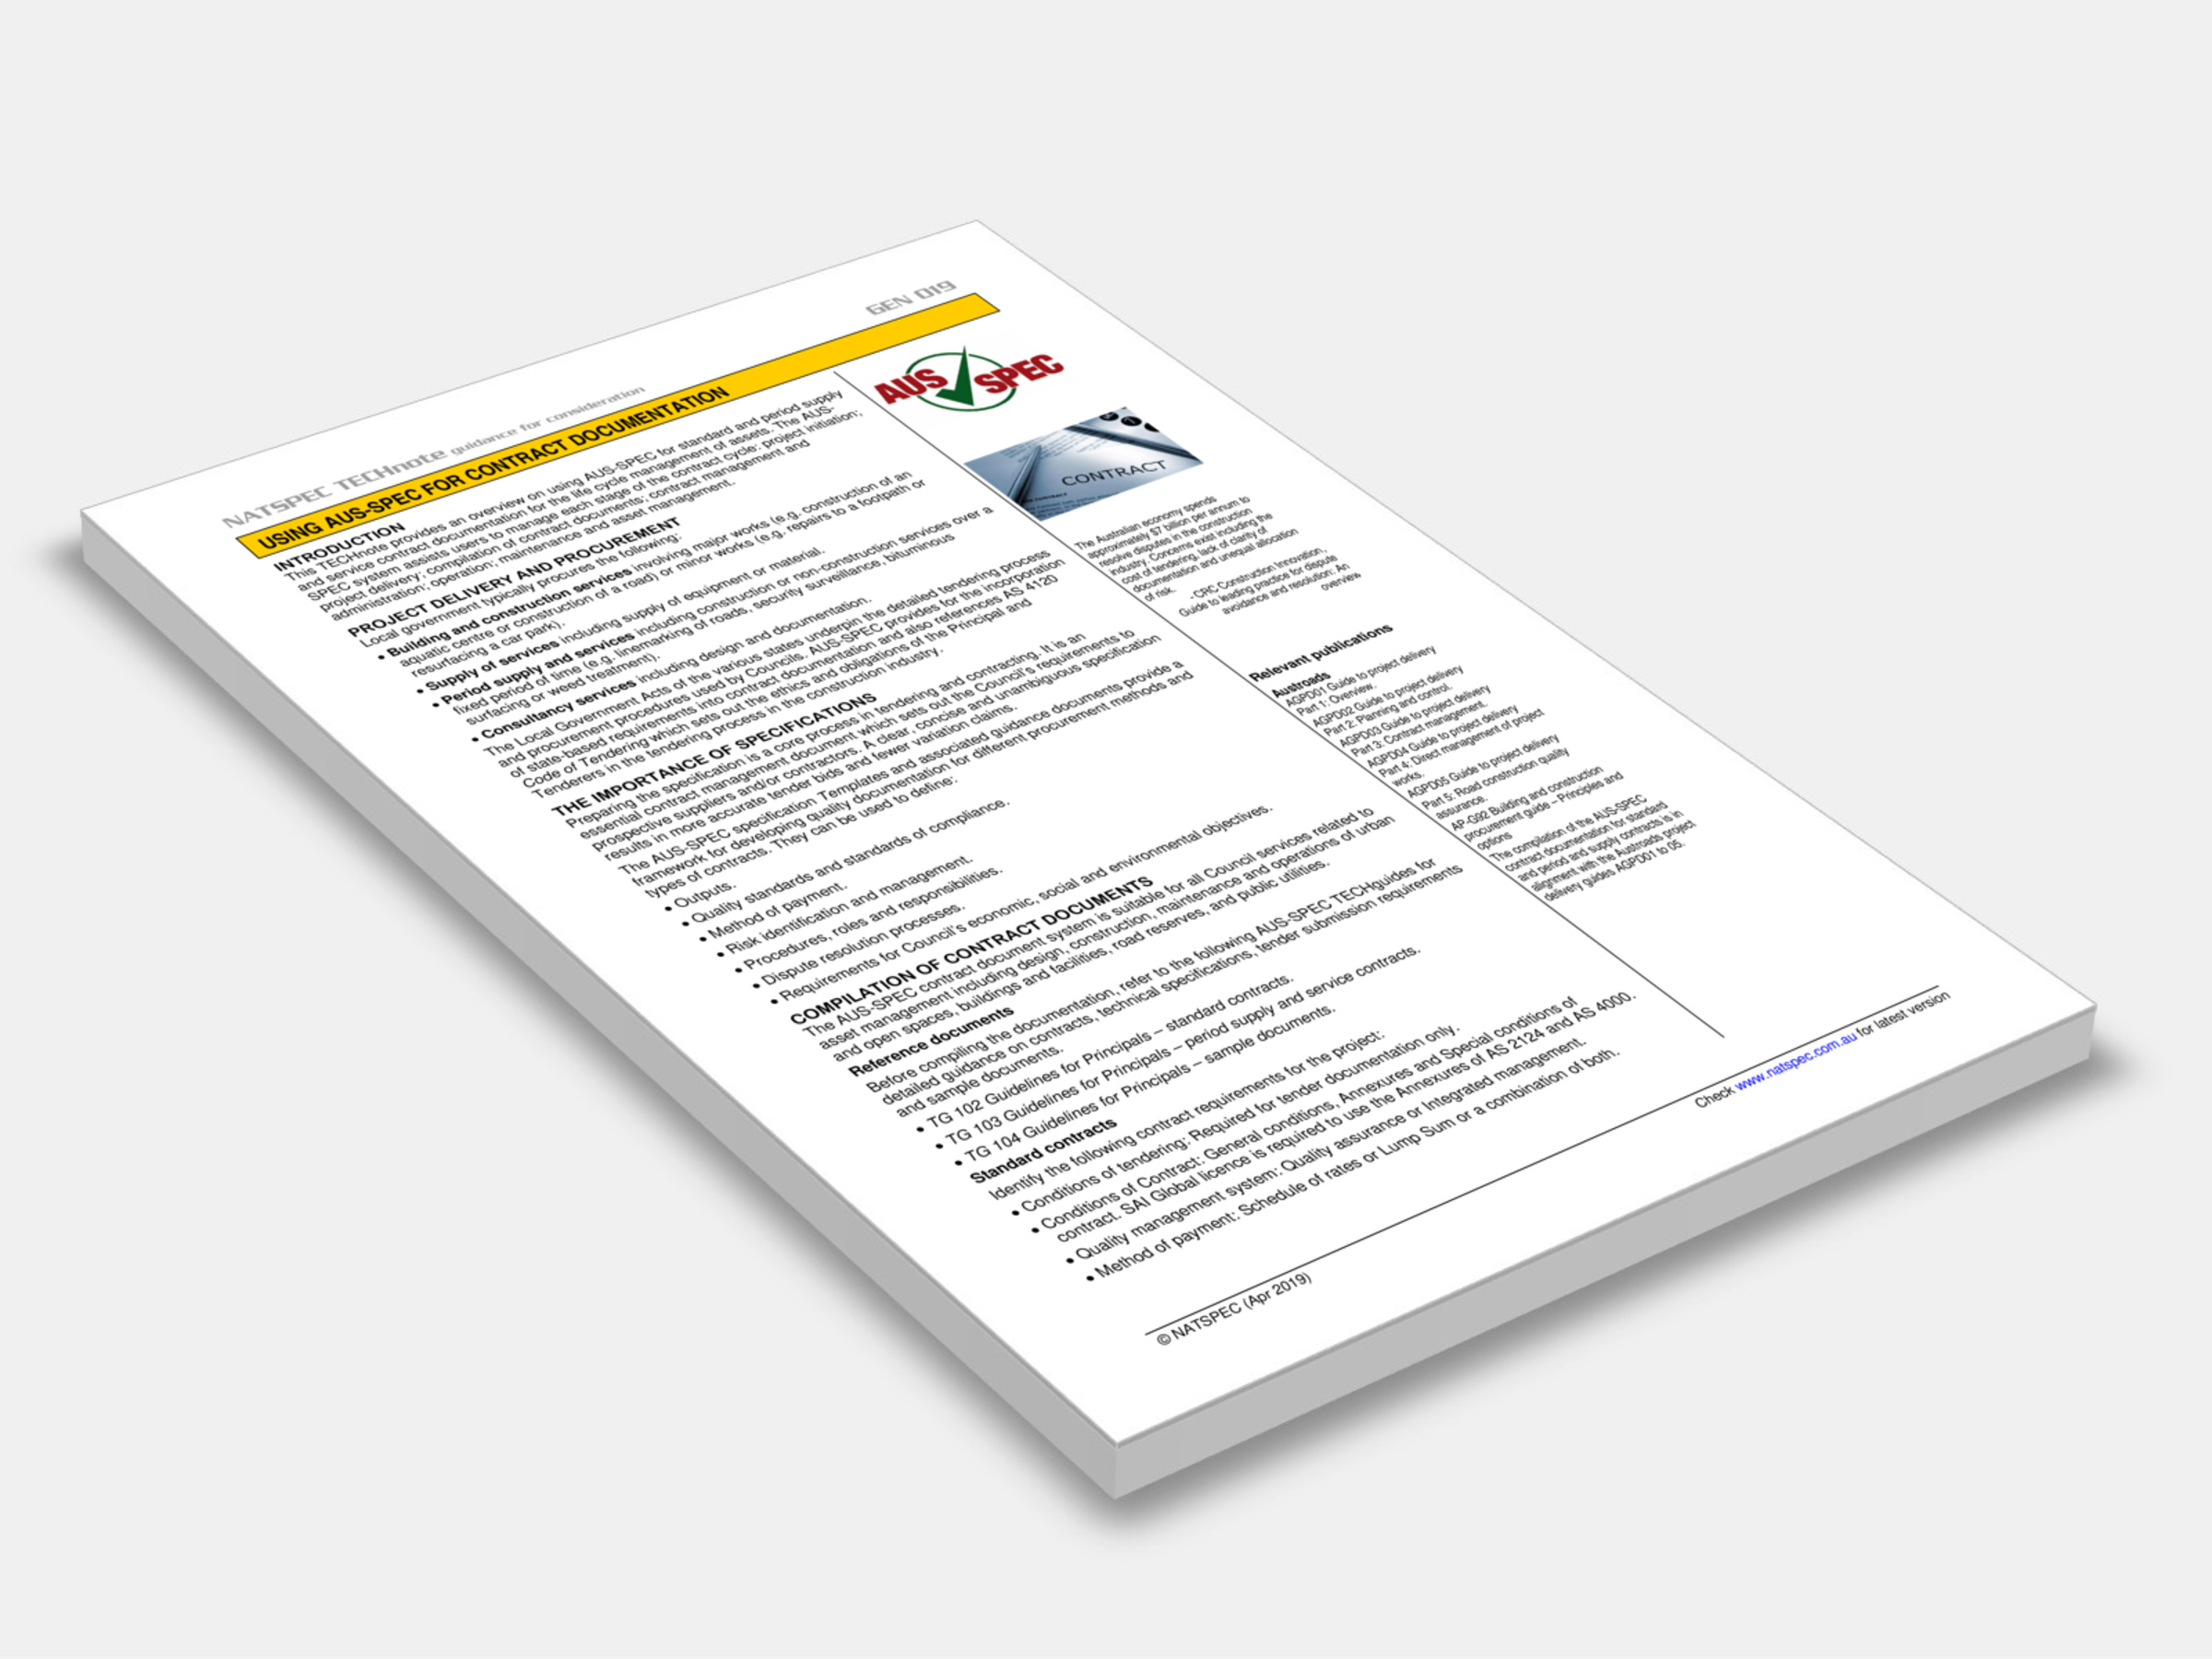 This TECHnote provides an overview on using AUS-SPEC for standard and period supply and service contract documentation for the life cycle management of assets.